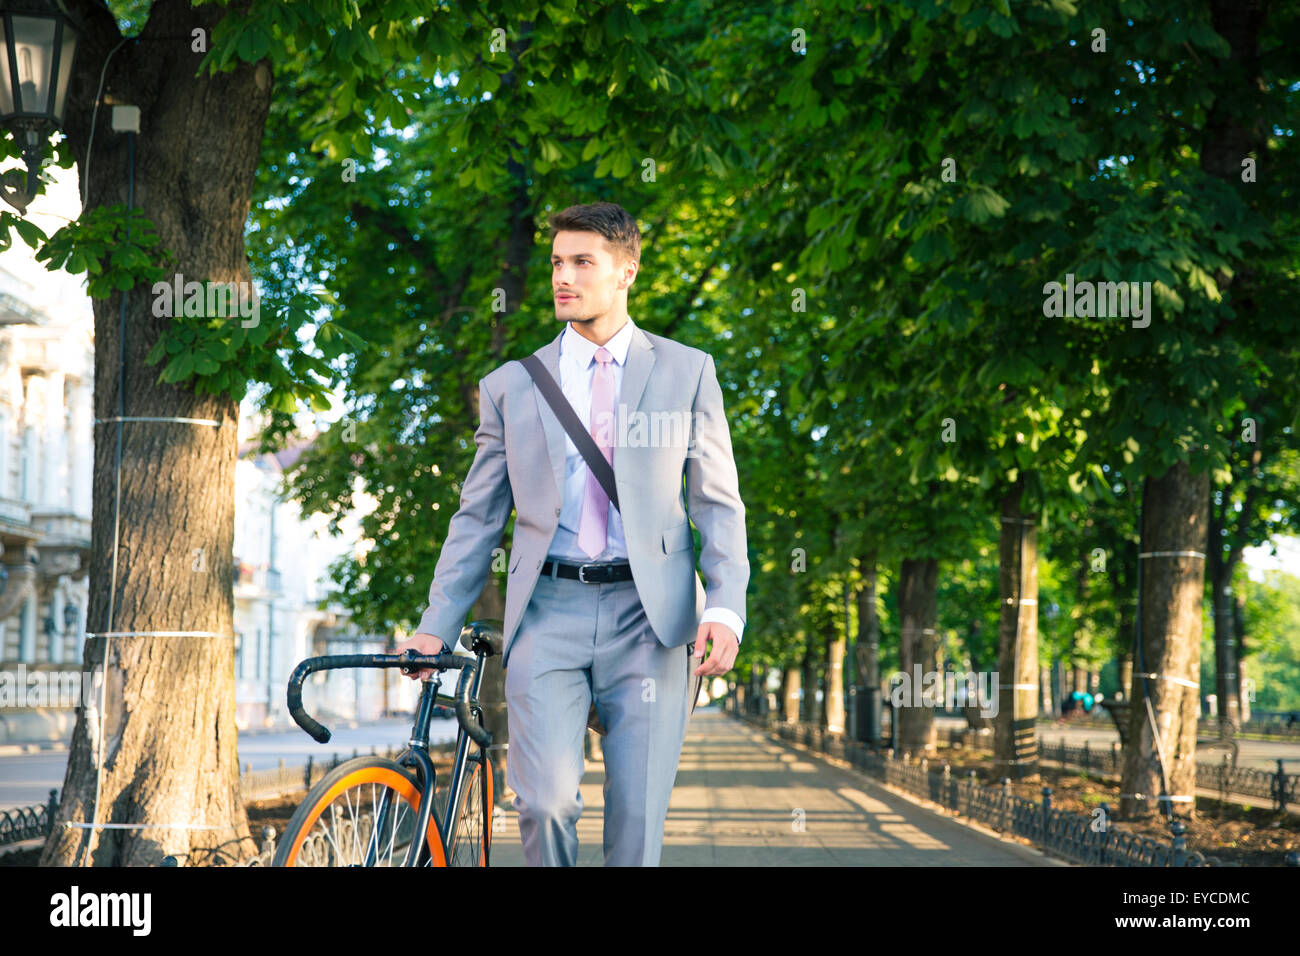 Handsome businessman walking with bicycle in park Stock Photo